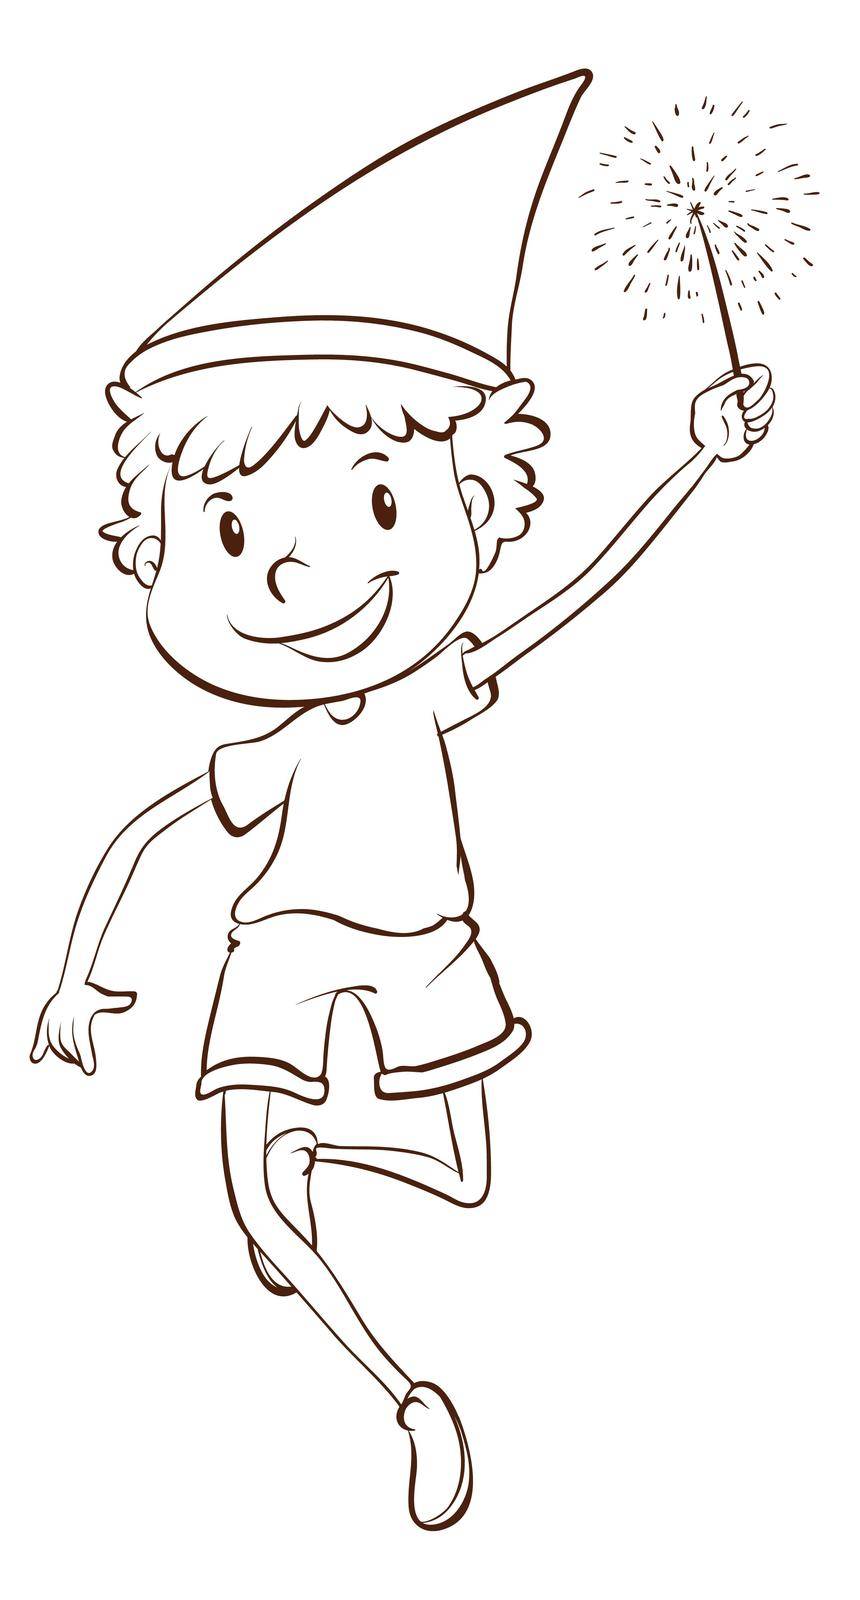 A plain drawing of a boy celebrating by iimages